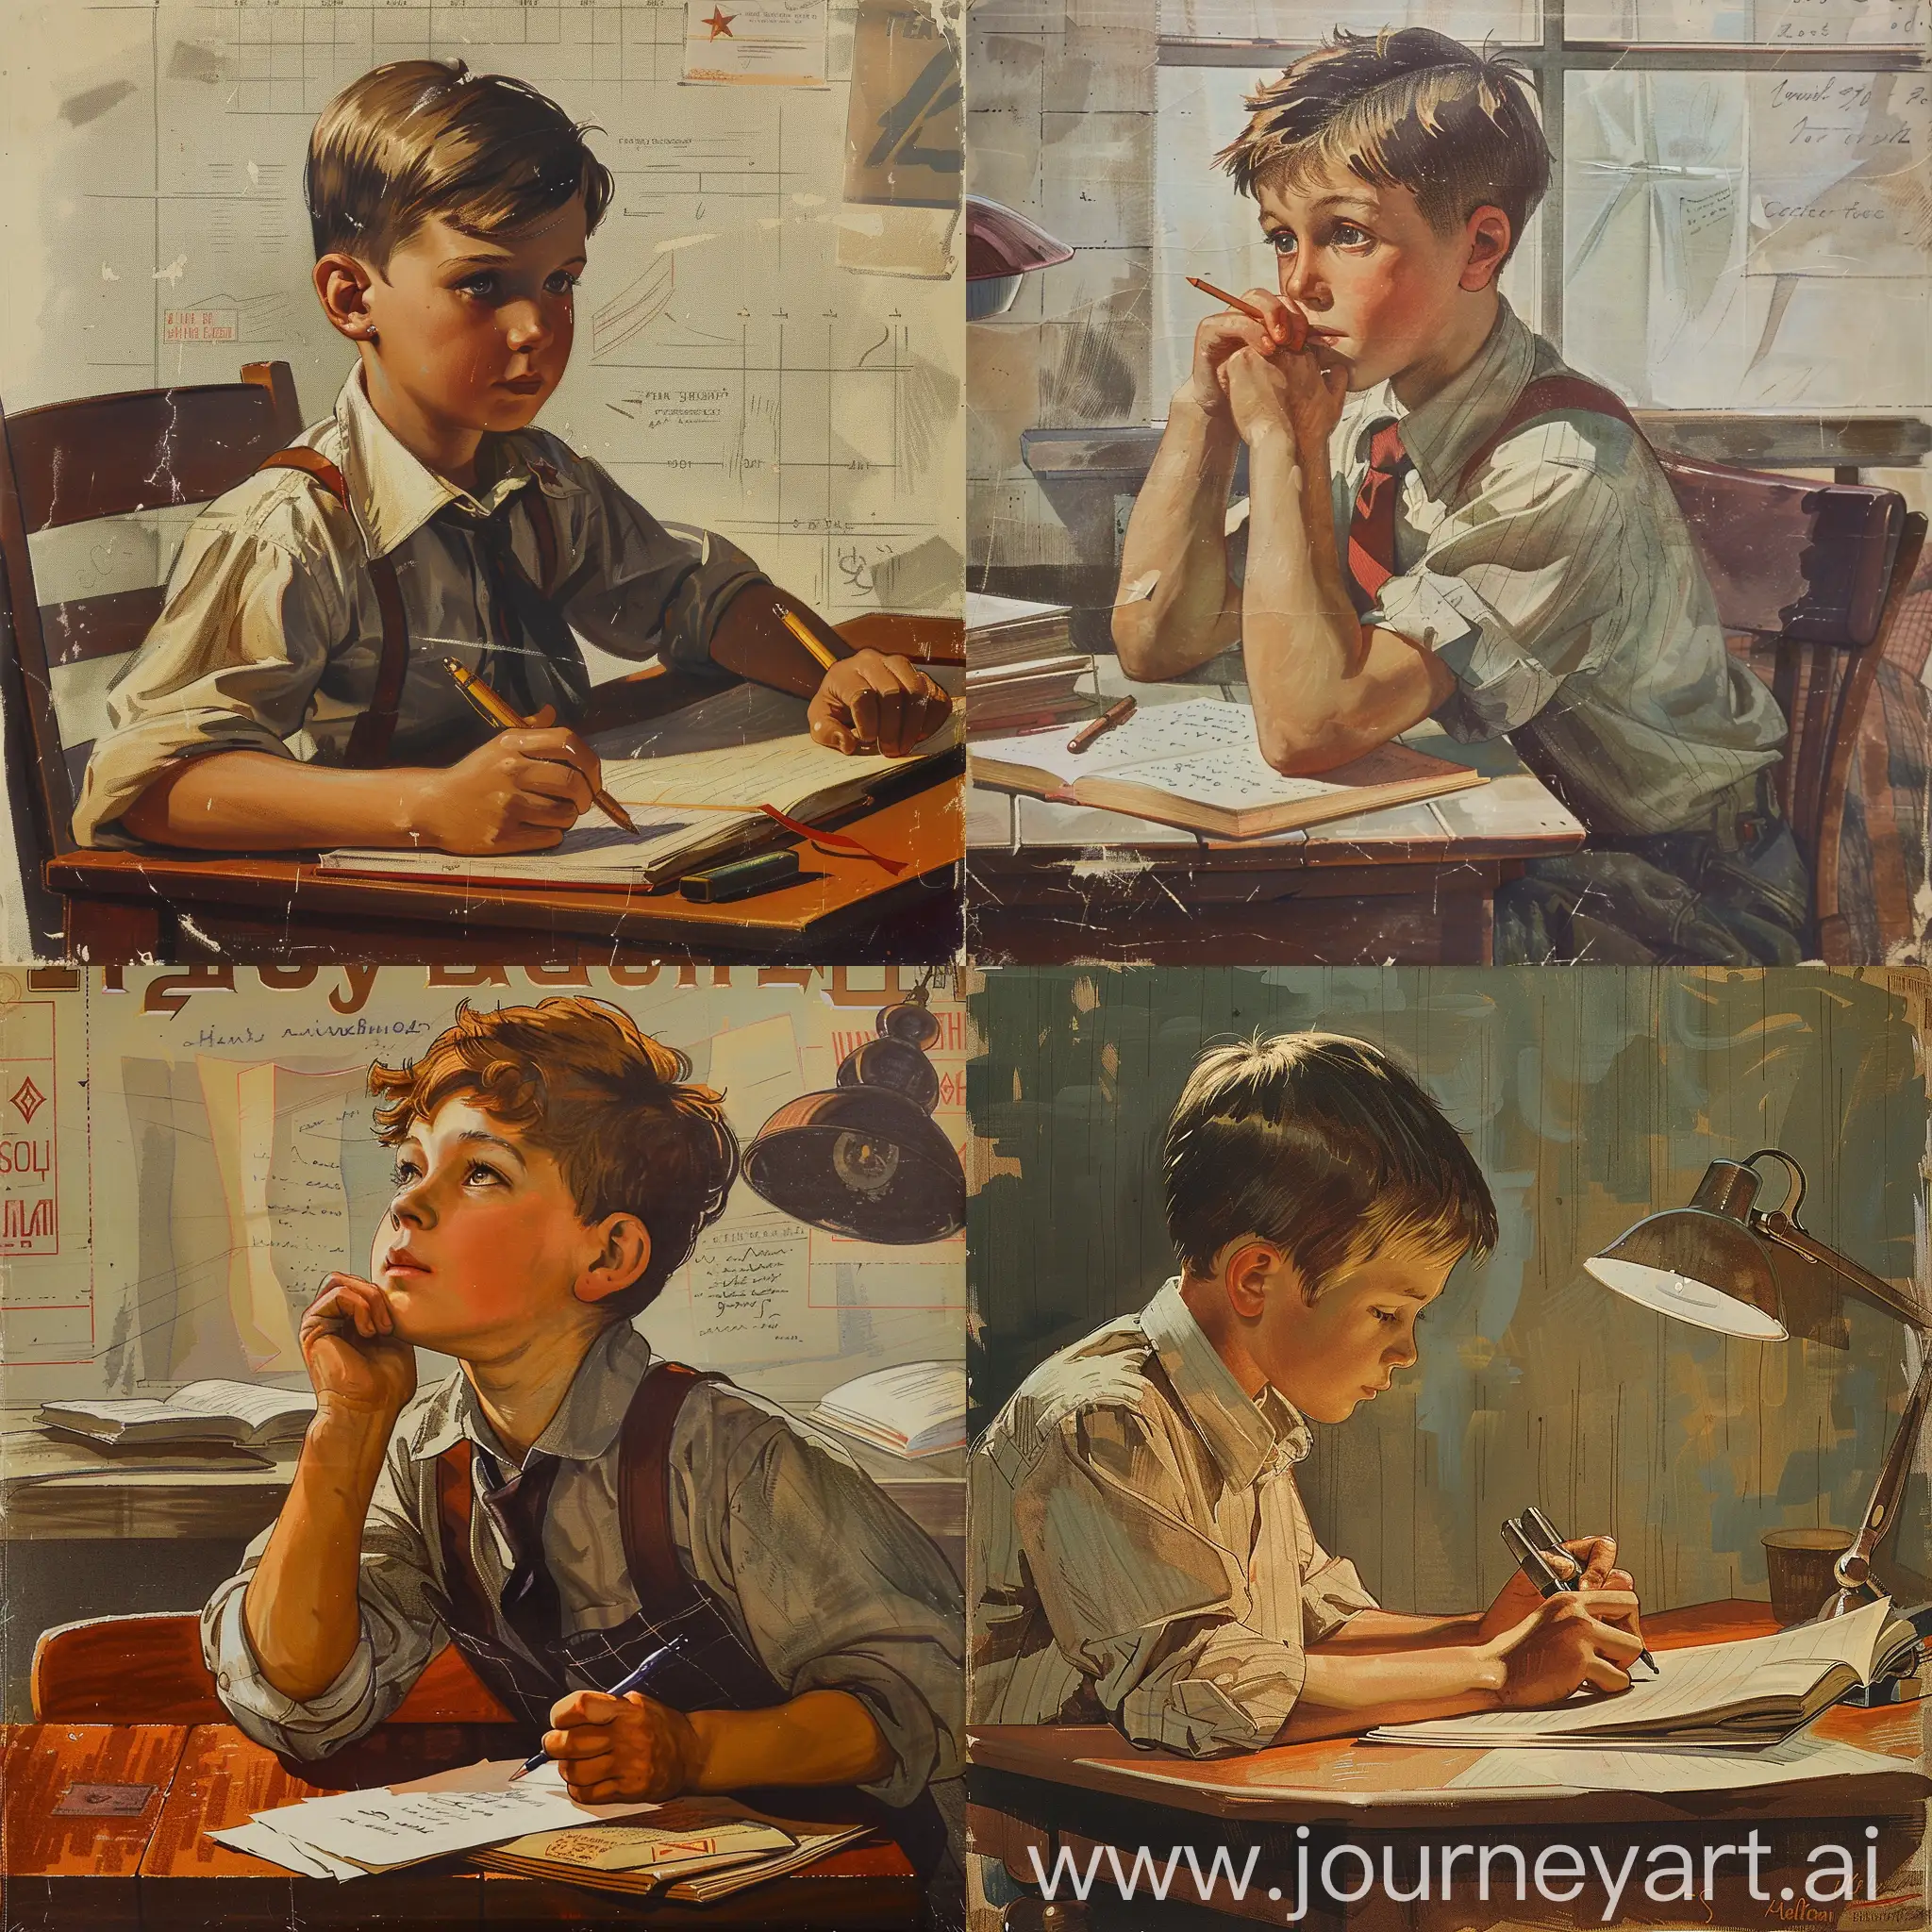 Young-Boy-Studying-at-Desk-Soviet-Poster-Style